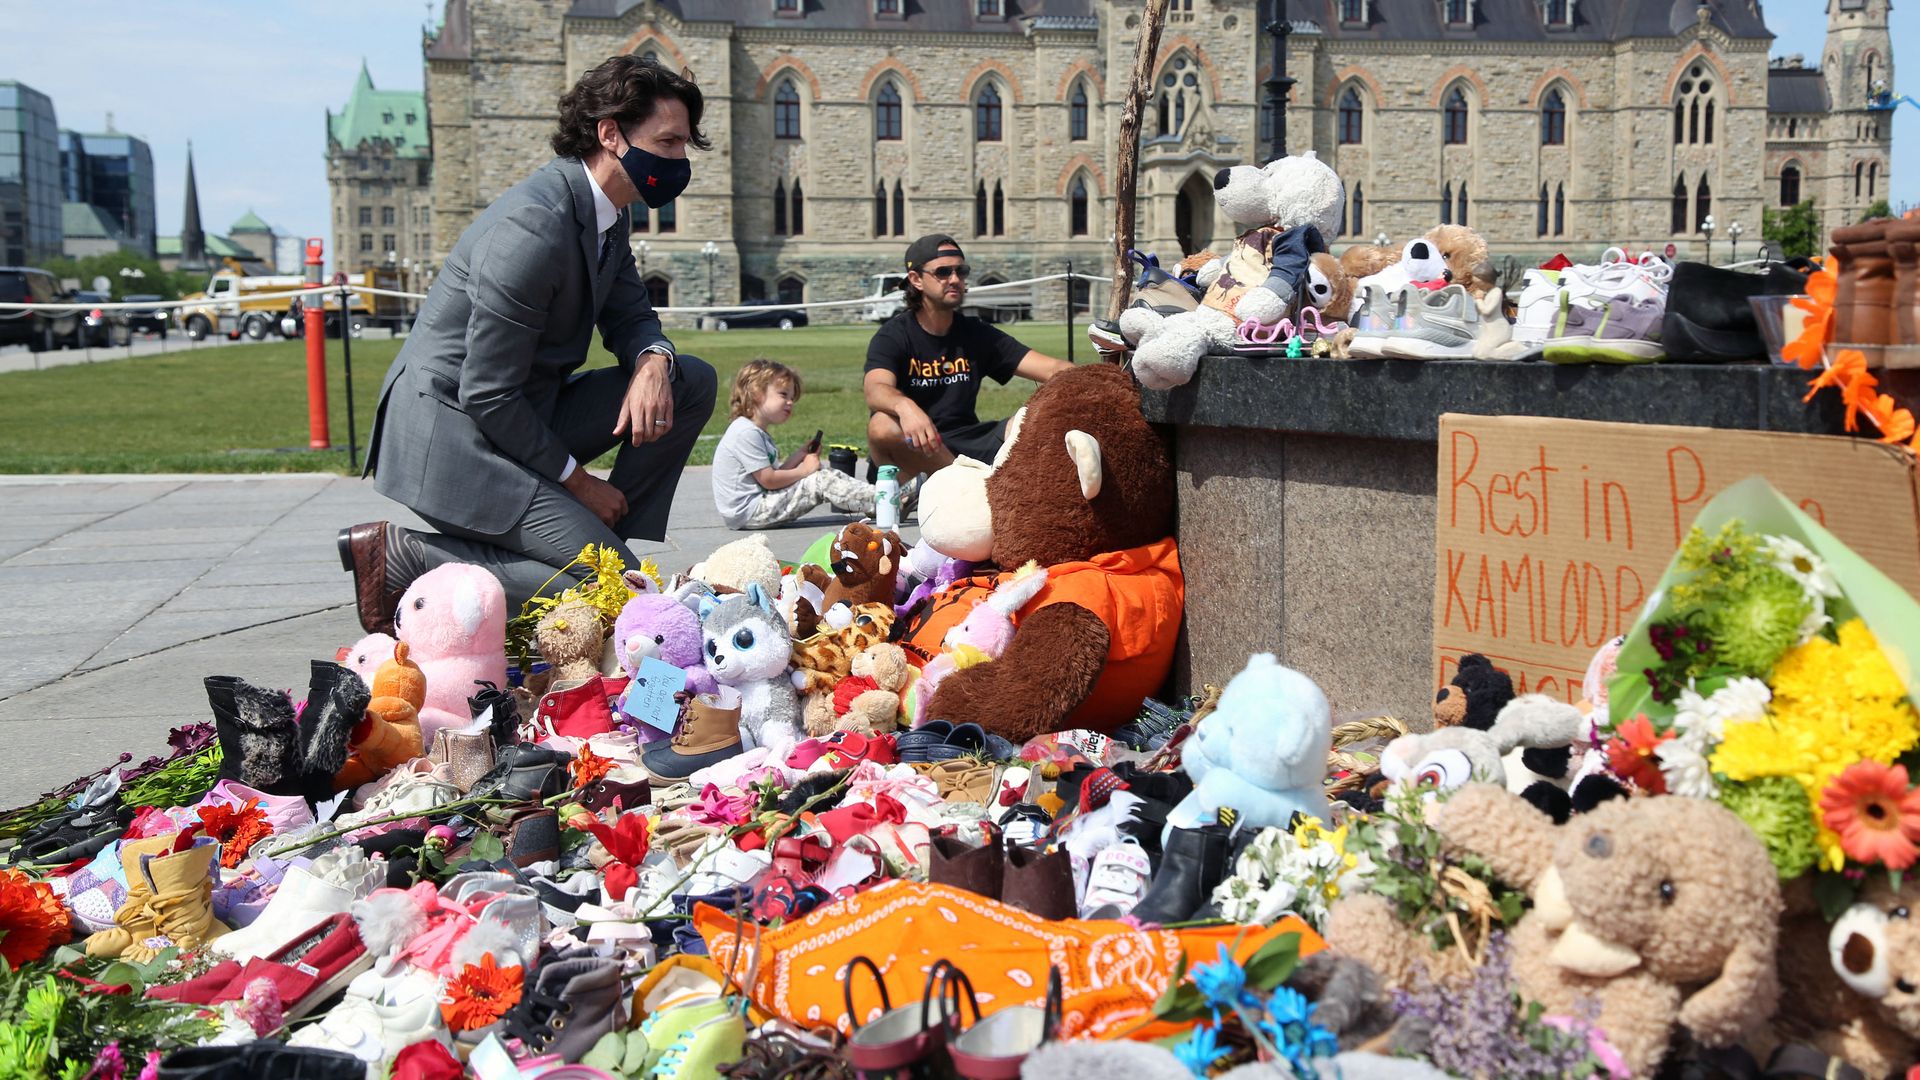 Canadian Prime Minister Justin Trudeau visits the makeshift memorial for indigenous children whose remains were found at a boarding school in British Columbia